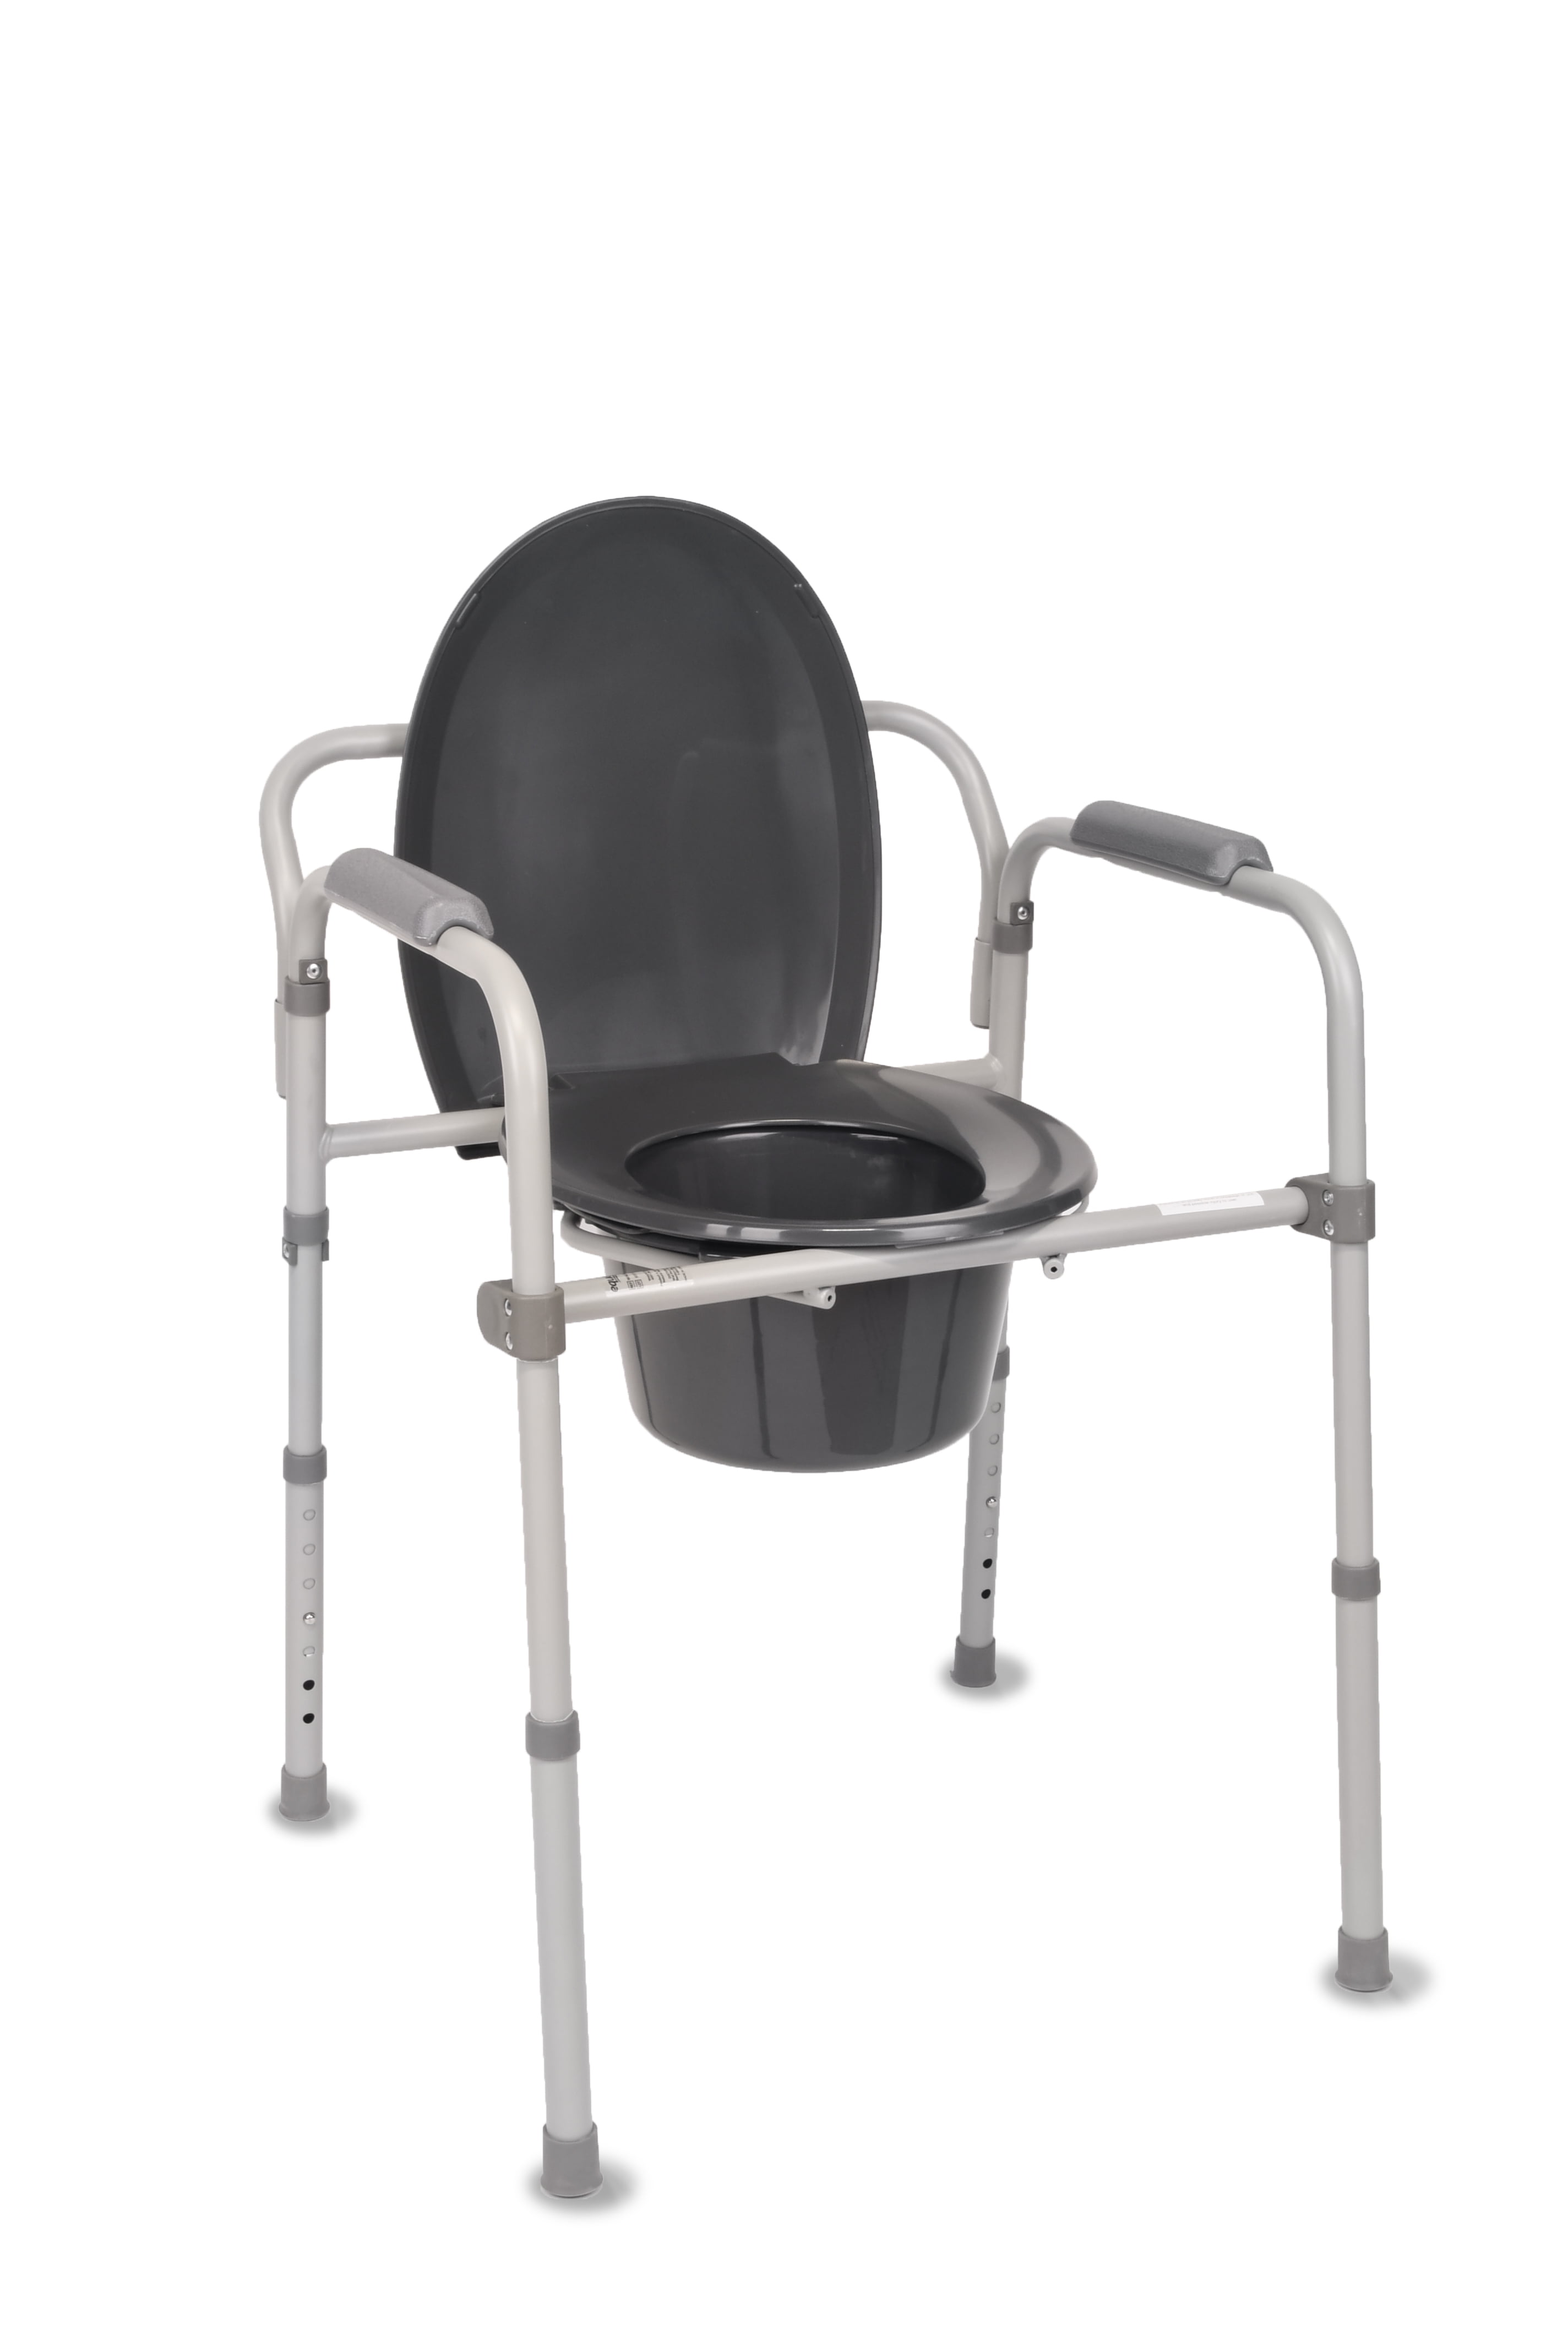 Equate Steel Foldable 3 In 1 Bedside Toilet Commode